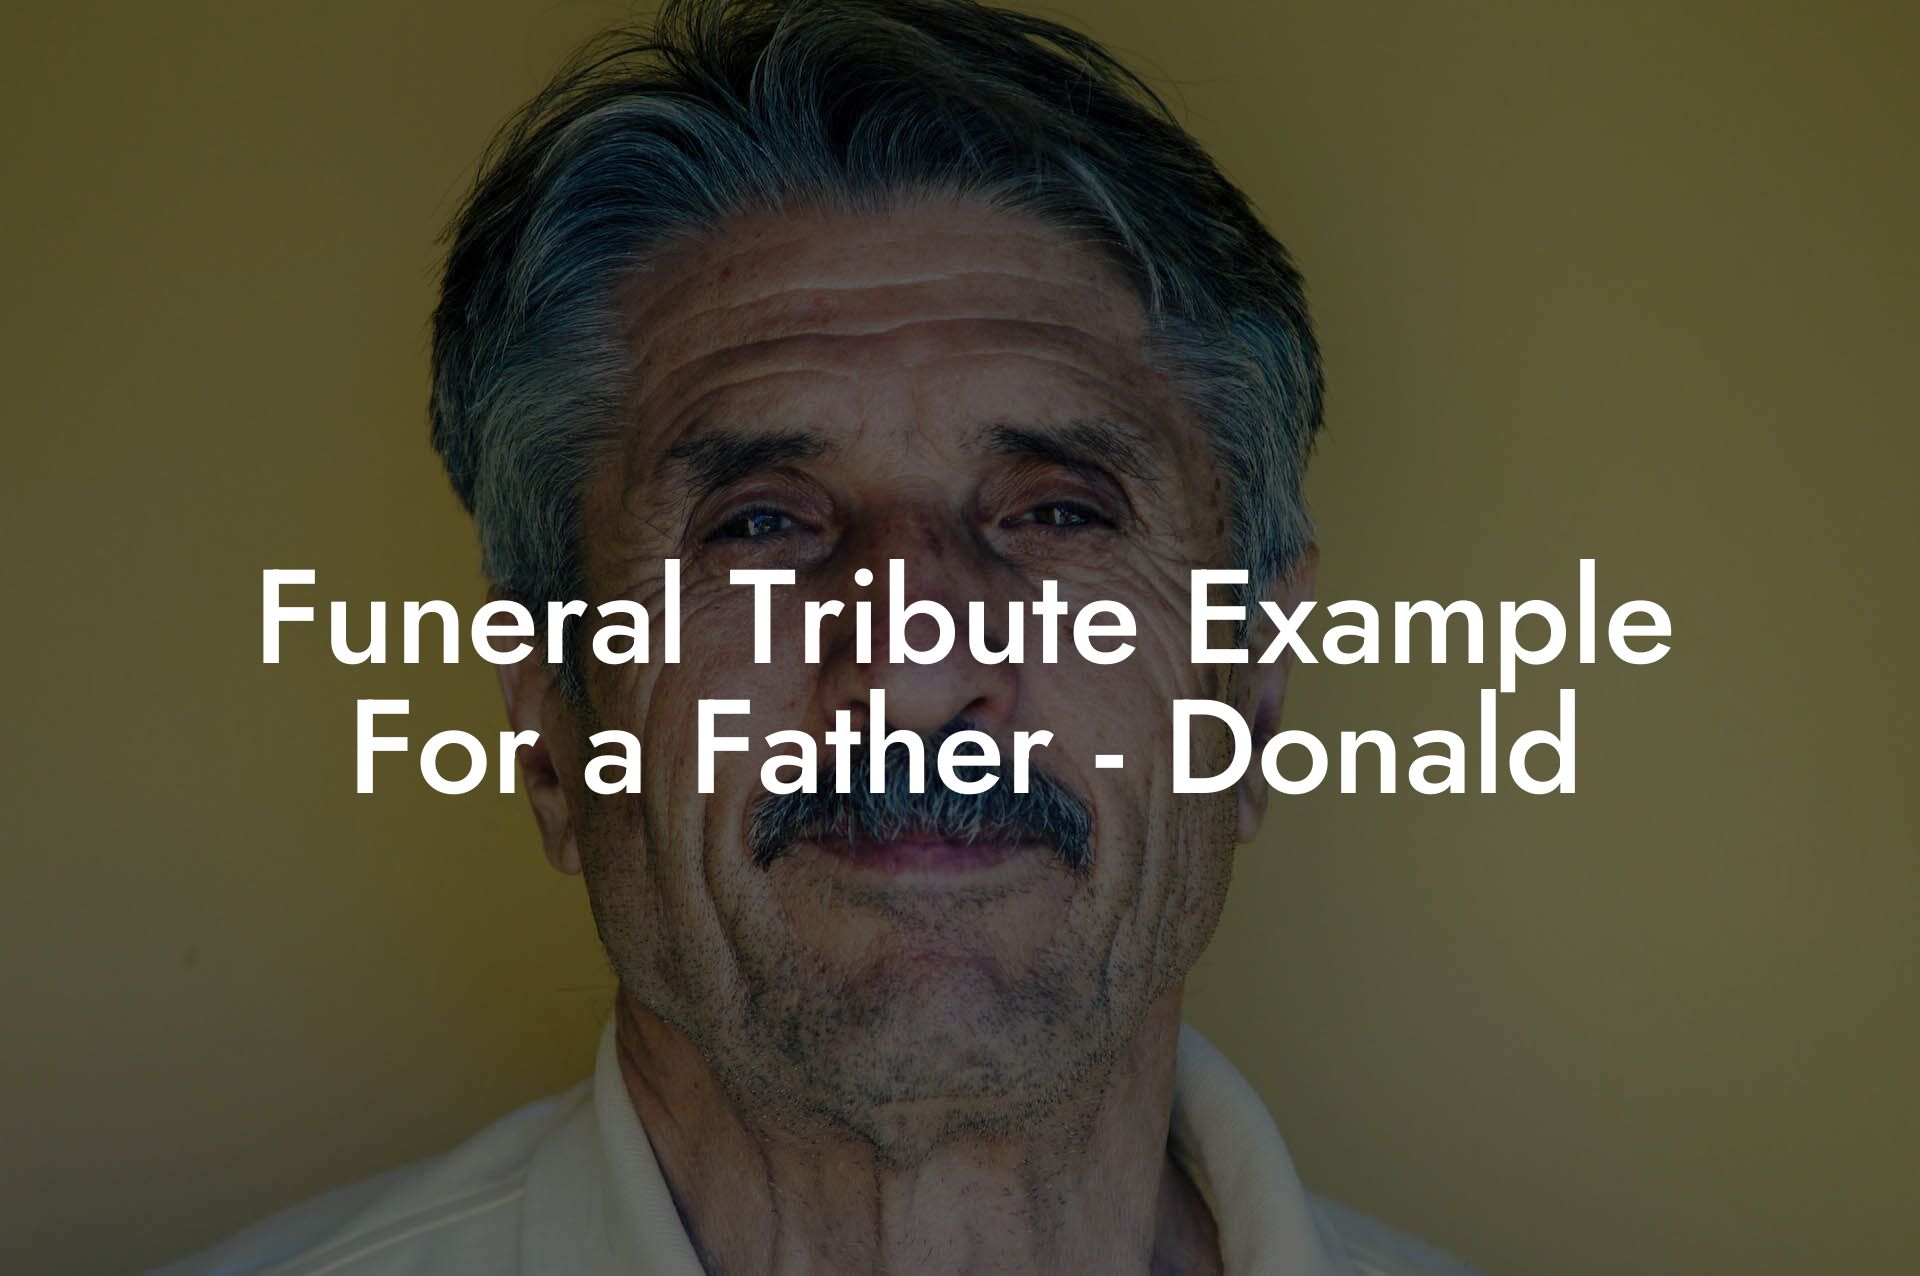 Funeral Tribute Example For a Father - Donald